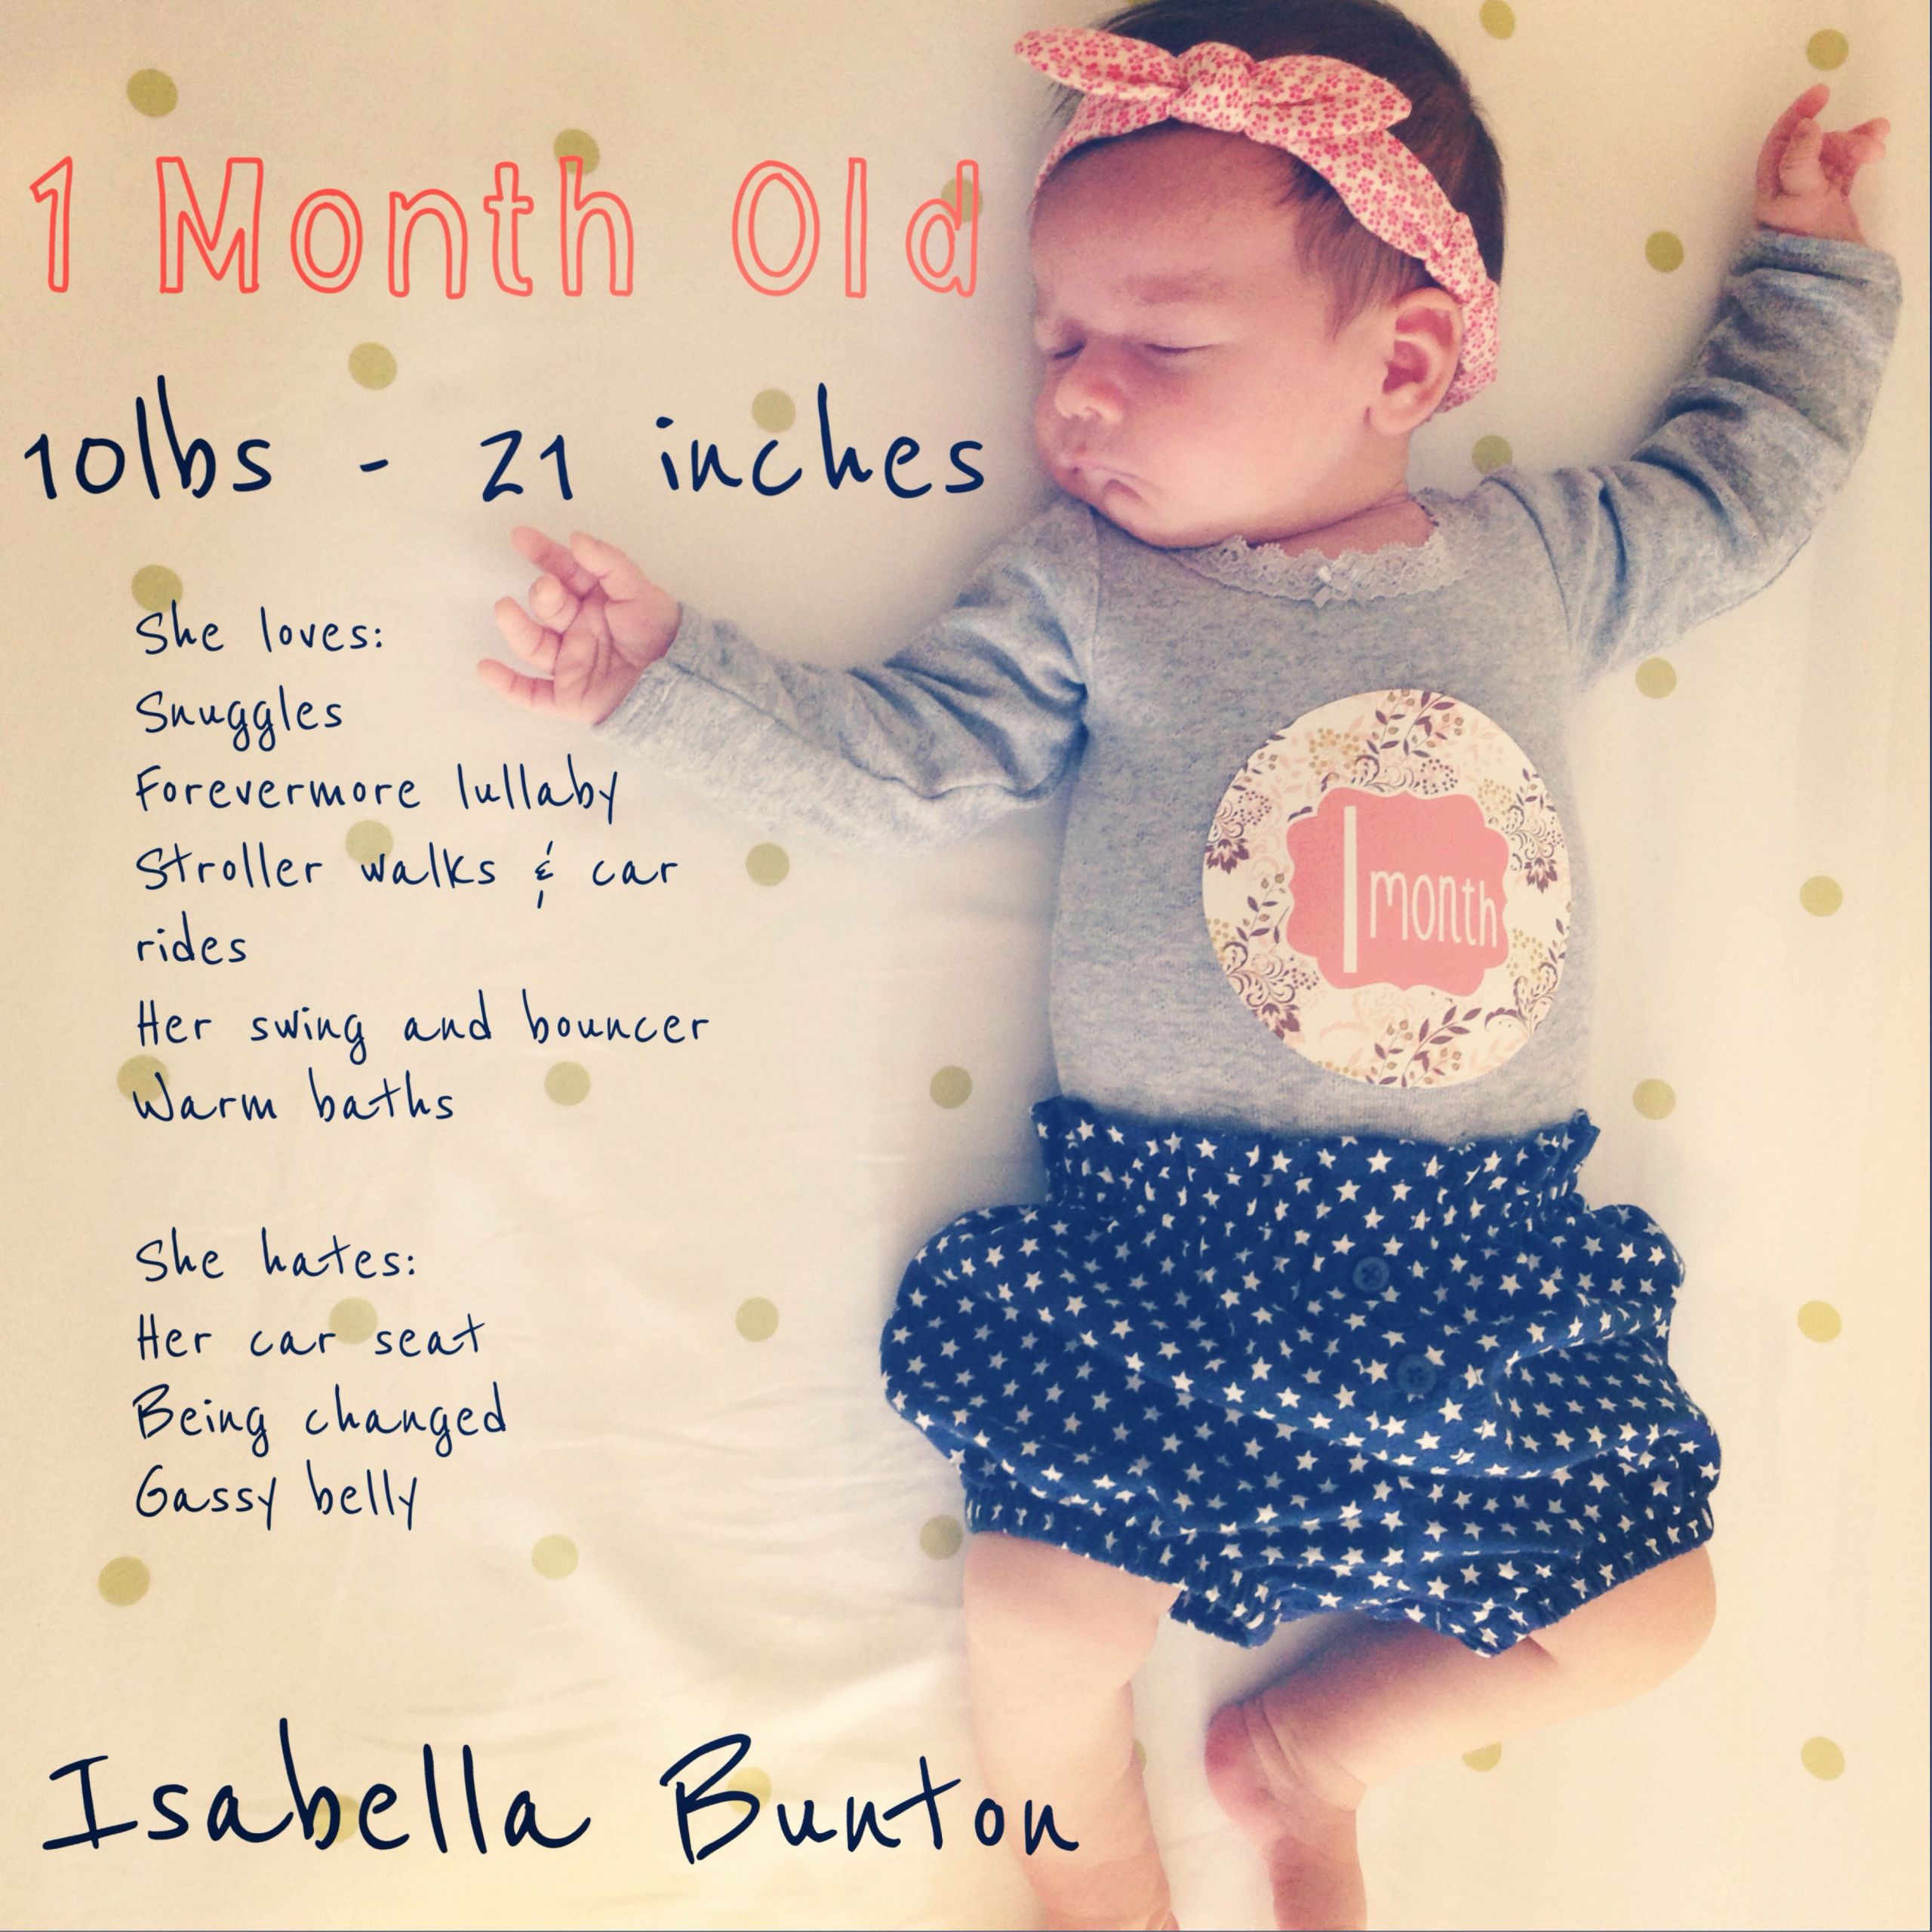 Happy 1 Month Old Baby Quotes
 1 month old picture